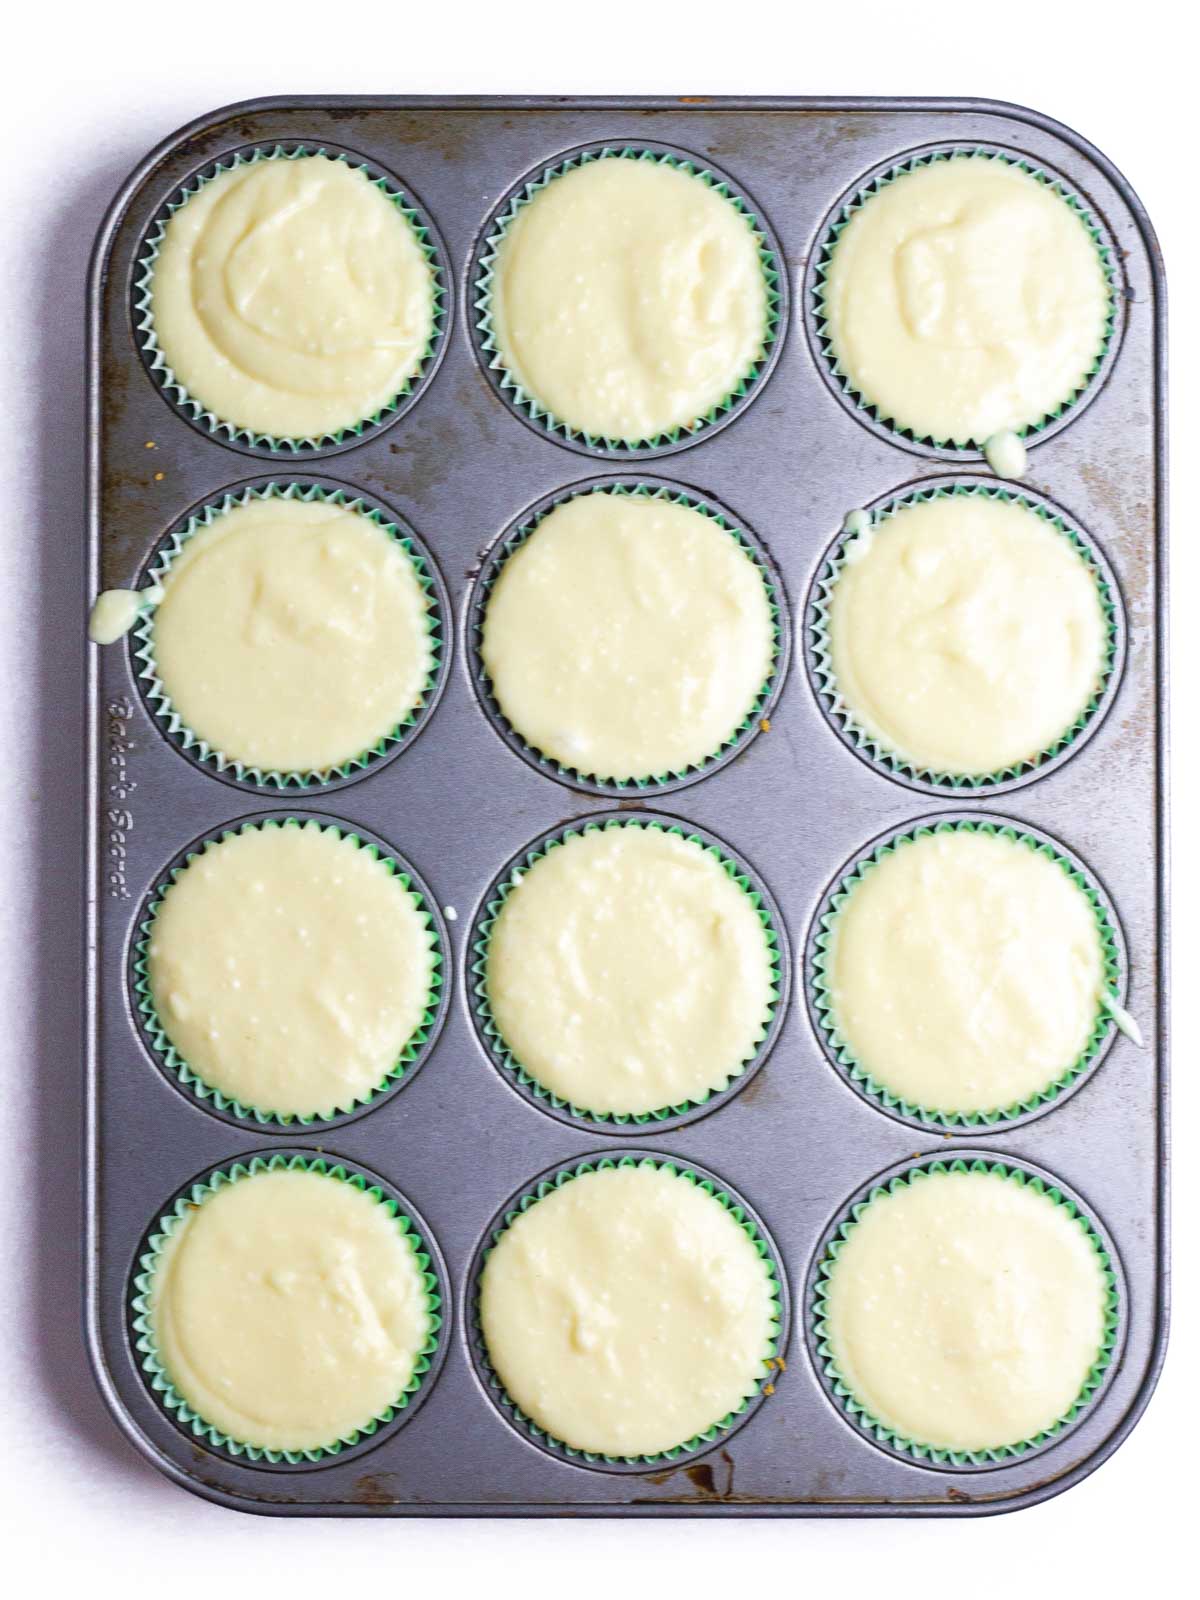 Eggnog cheesecakes in a 12-cup muffin tin, ready to chill.